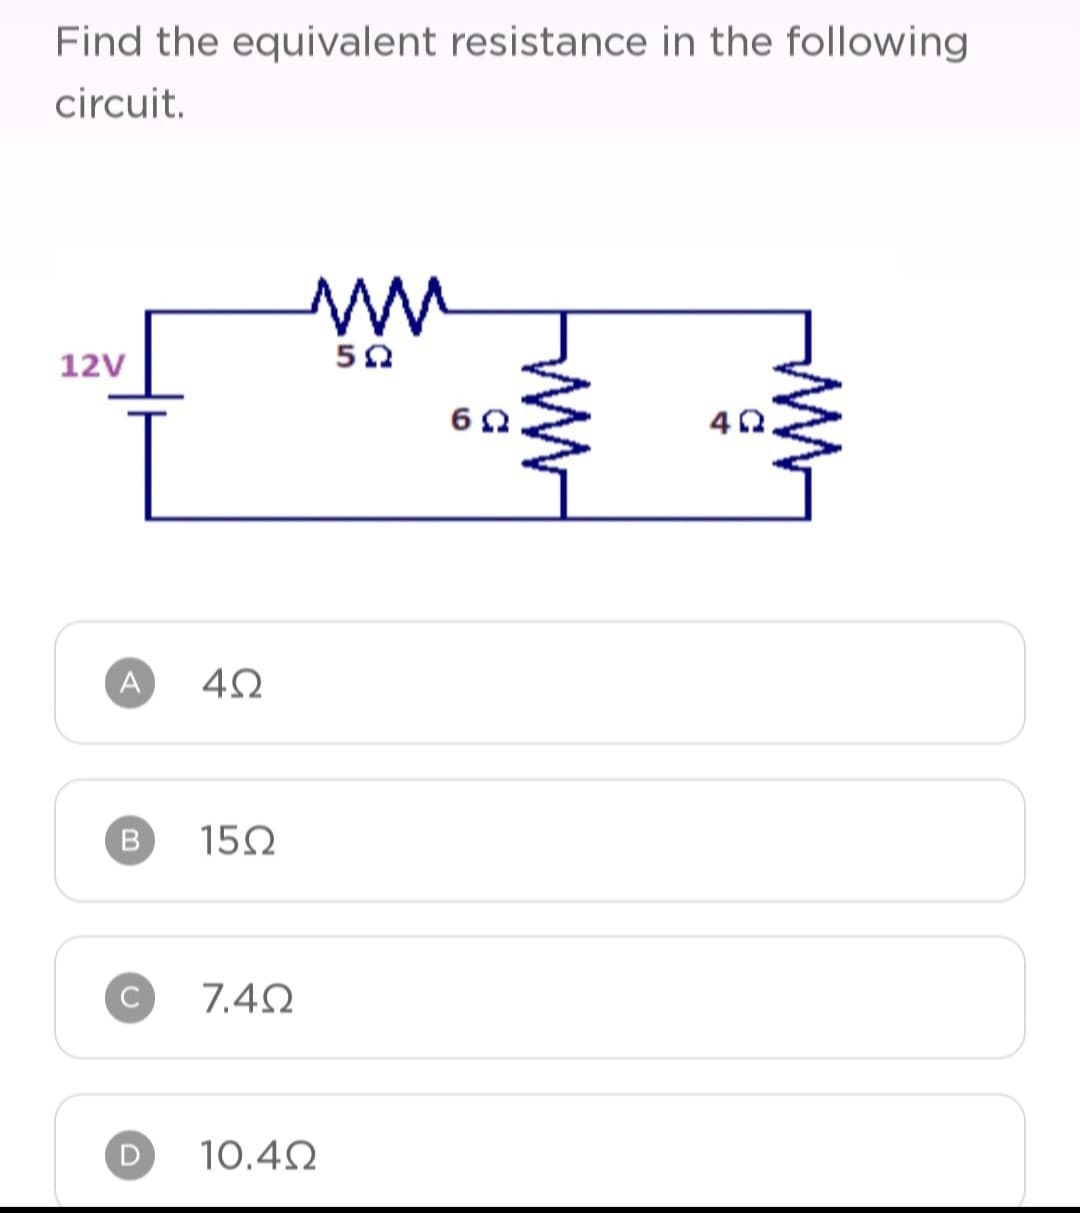 Find the equivalent resistance in the following
circuit.
12V
A
Β
C
D
4Ω
15Ω
7.4Ω
Μ
10.4Ω
5Ω
6Ω